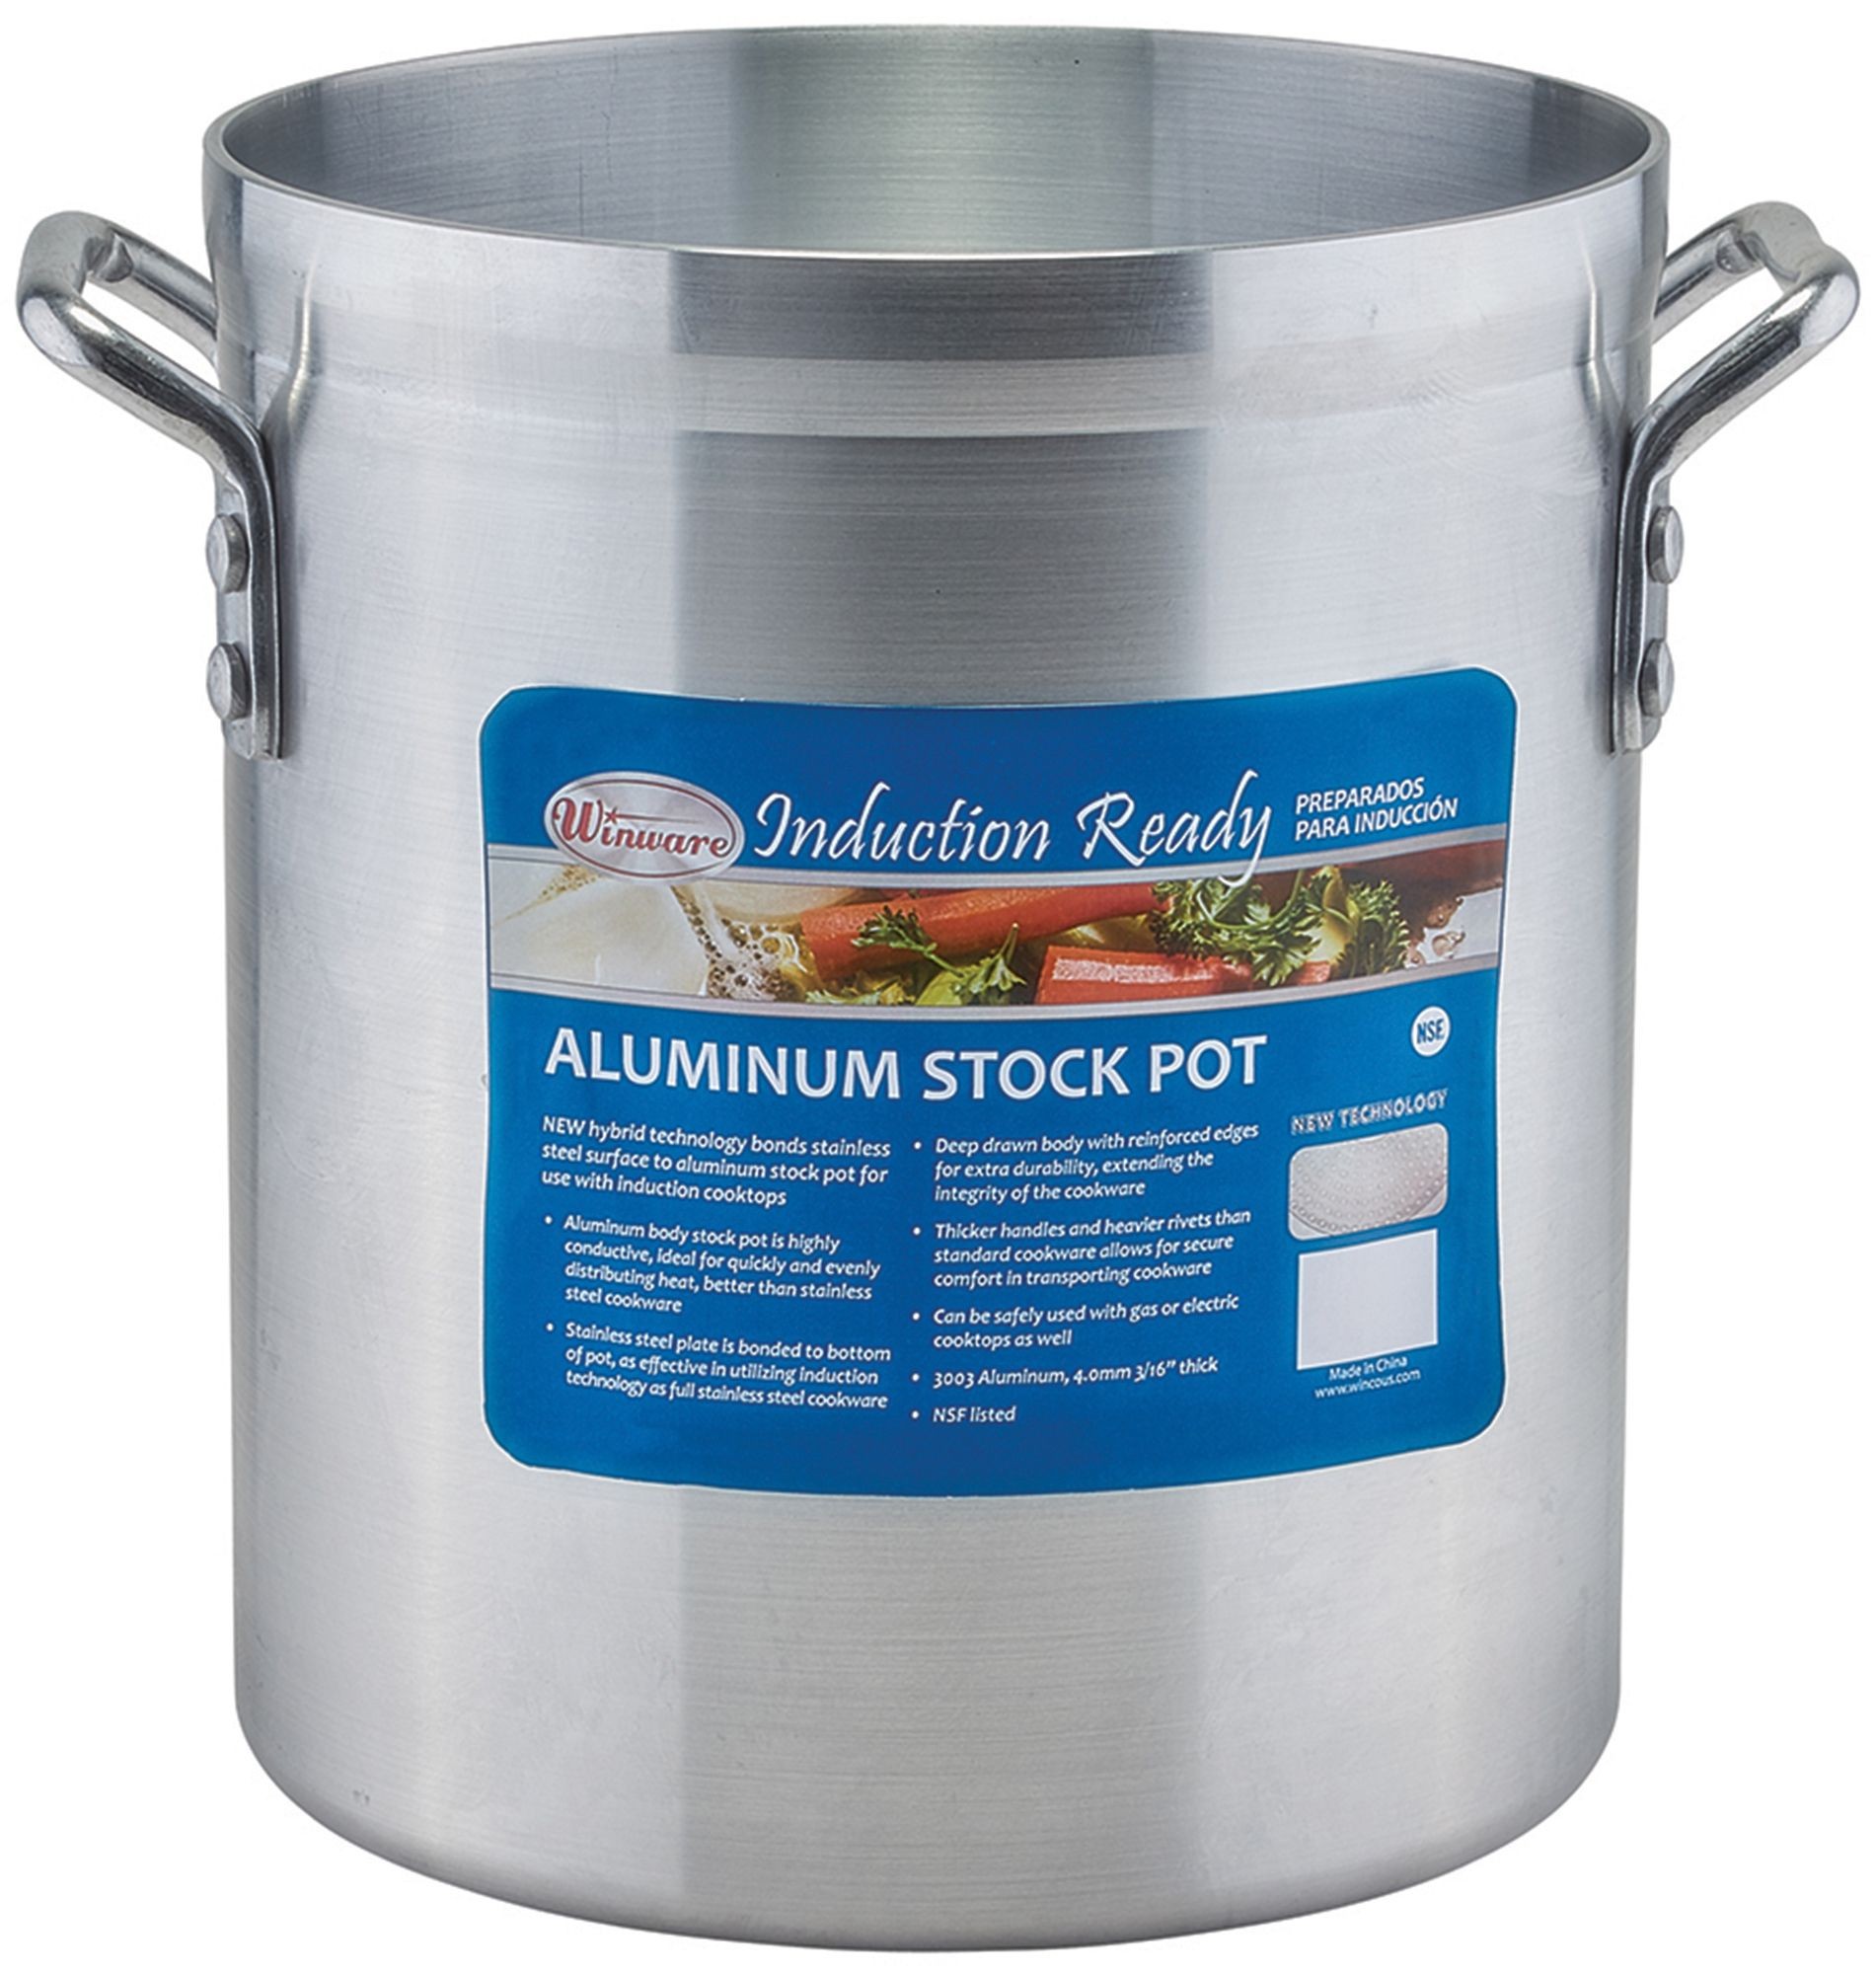 Winco AXSI-16 16 Qt. Induction Ready Aluminum Stock Pot with Stainless Steel Bottom